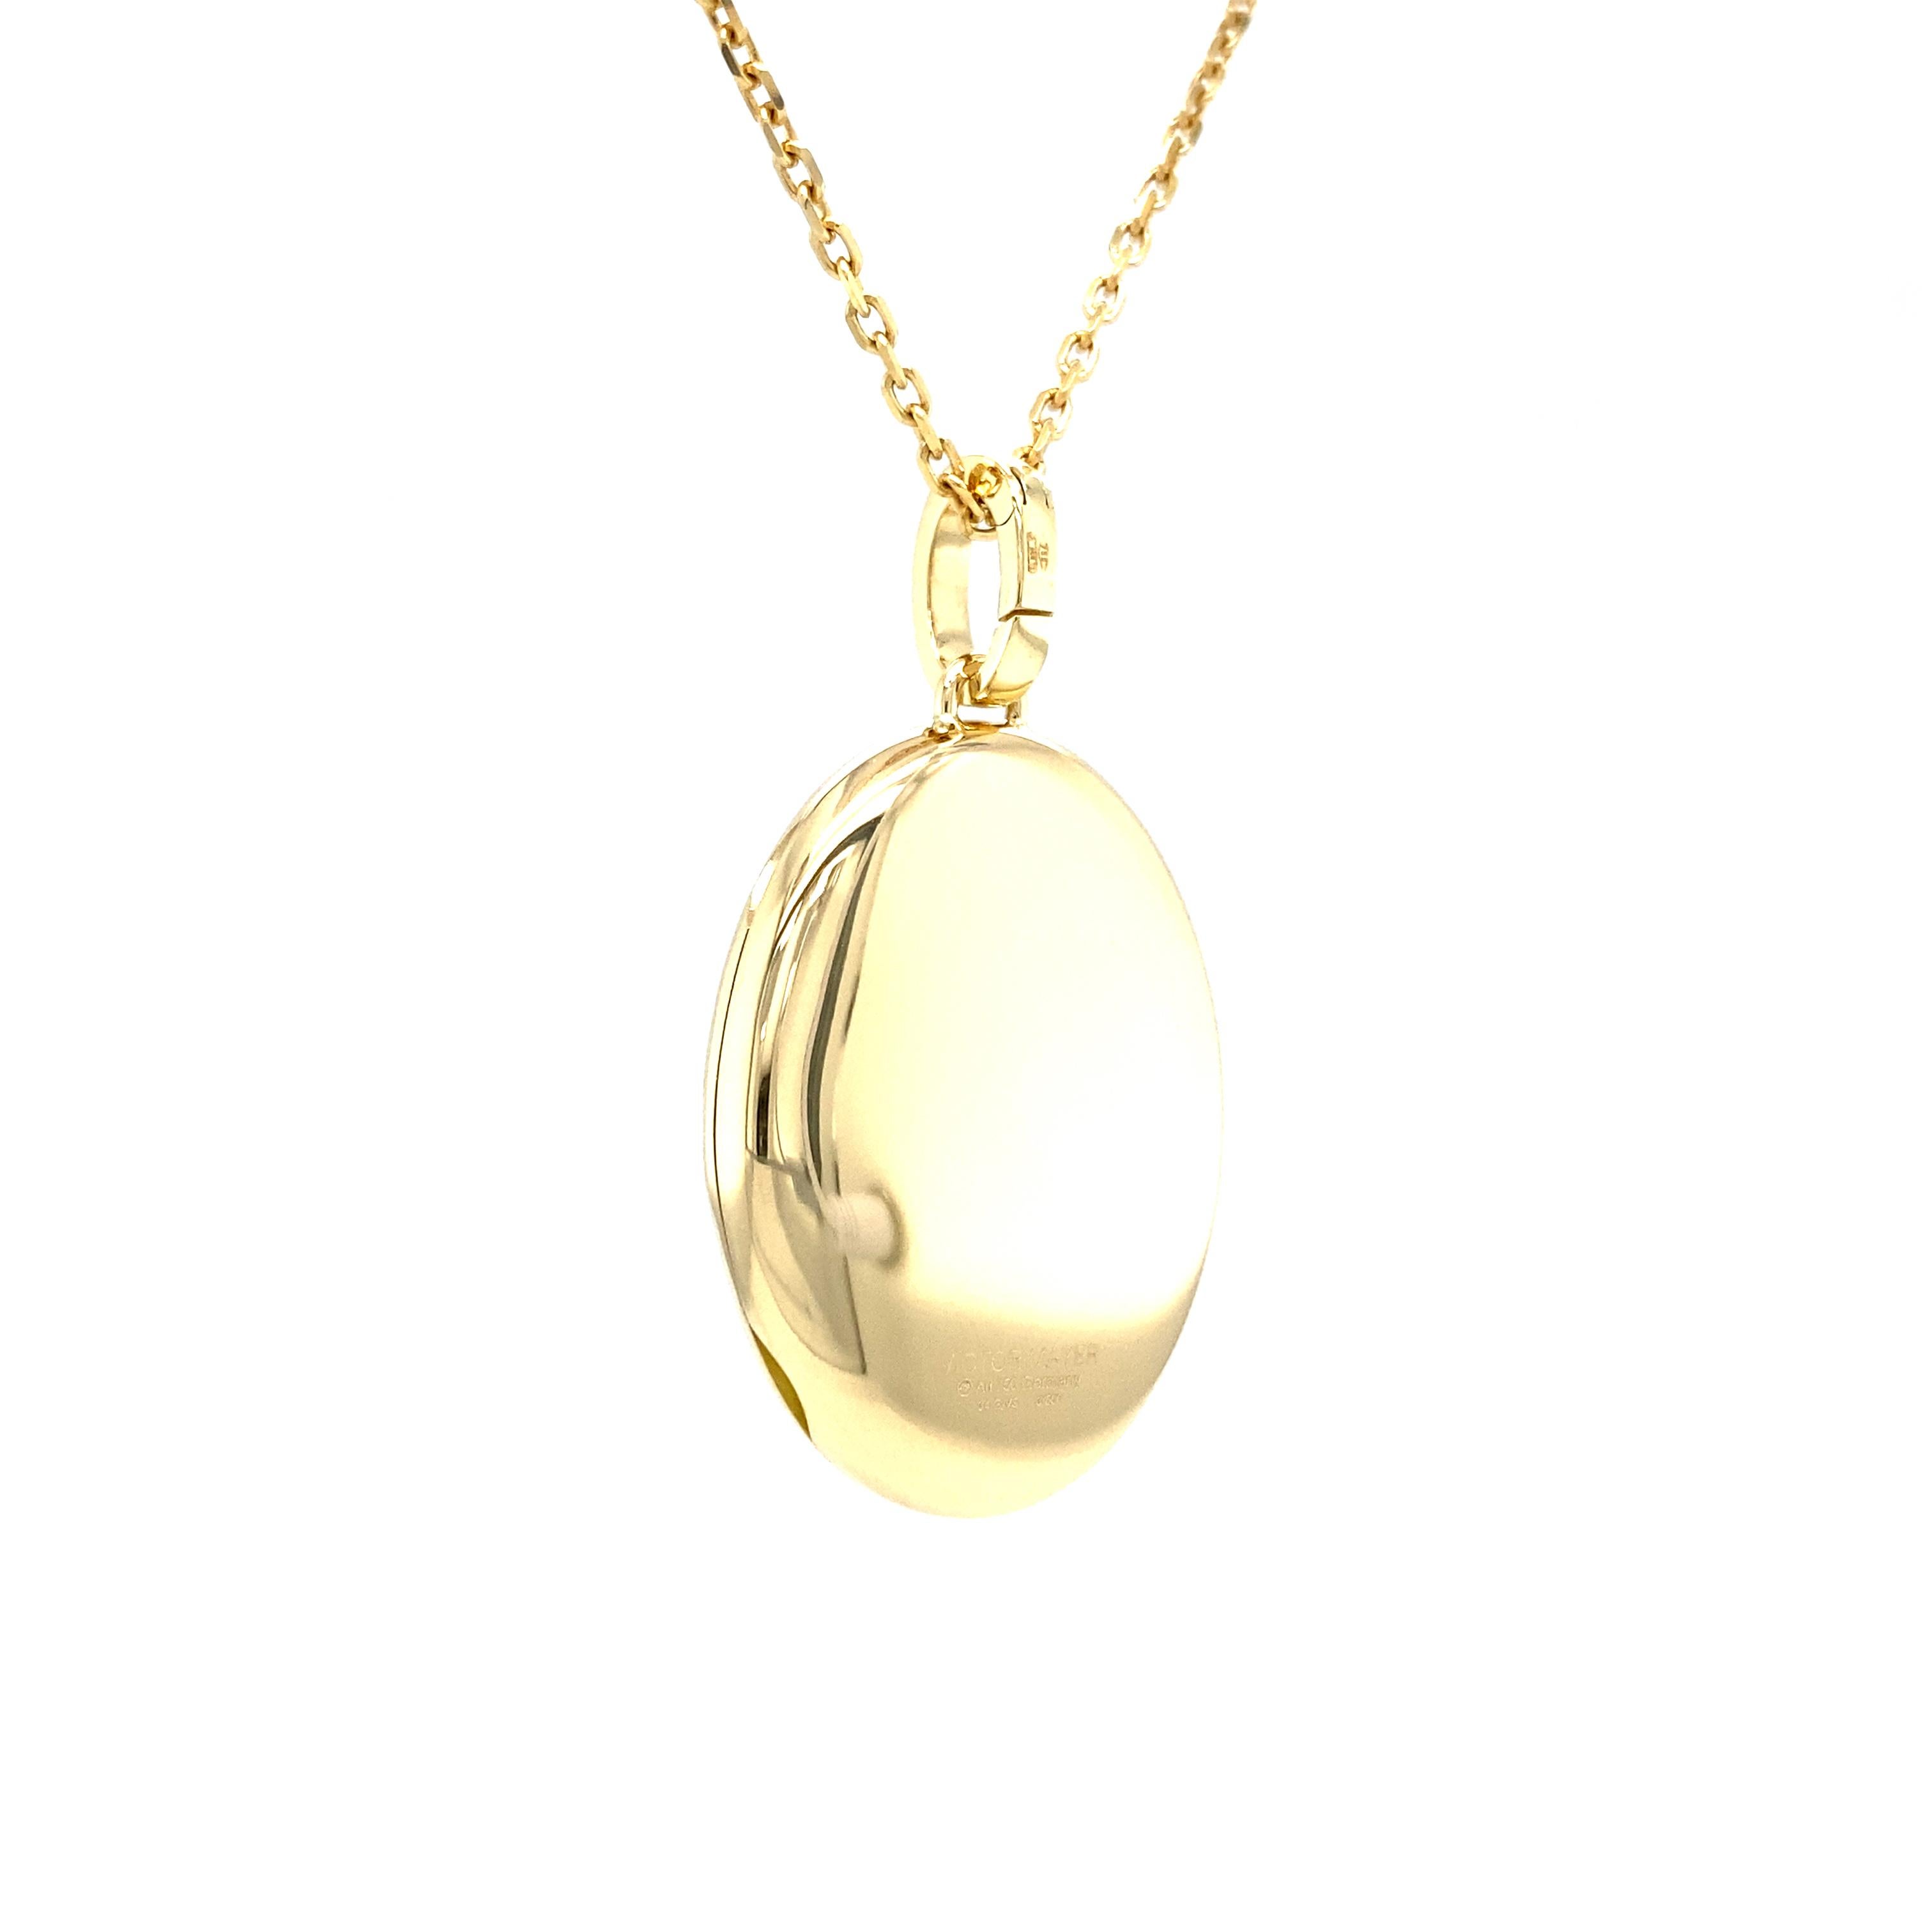 Oval Polished Locket Pendant Necklace - 18k Yellow Gold - 9 Diamonds 0.14ct G VS For Sale 1